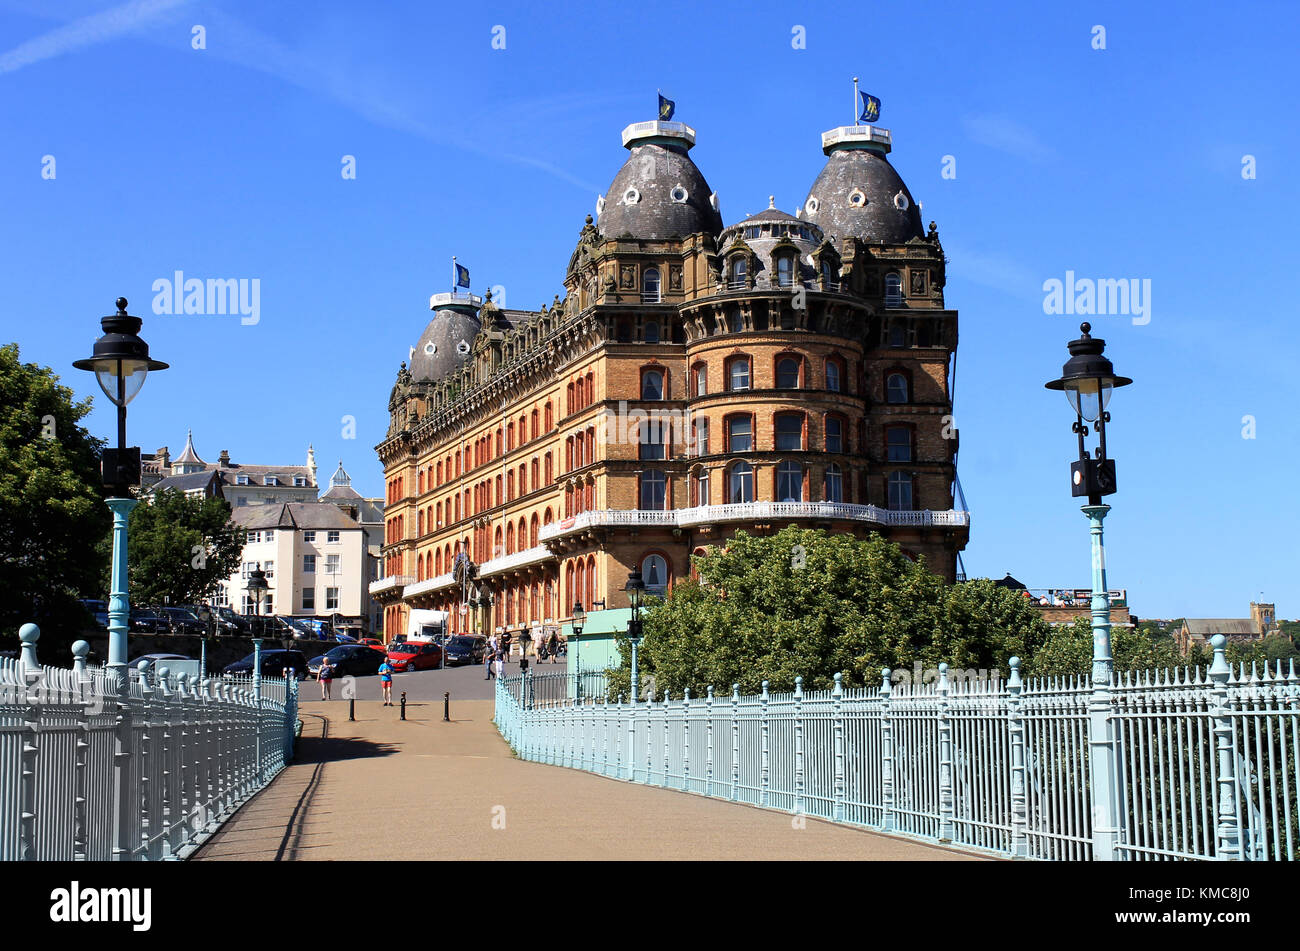 SCARBOROUGH, NORTH YORKSHIRE, ENGLAND - 19th of June 2017: Grand Hotel building viewed over the Spa bridge on 19th of June 2017 in Scarborough during  Stock Photo